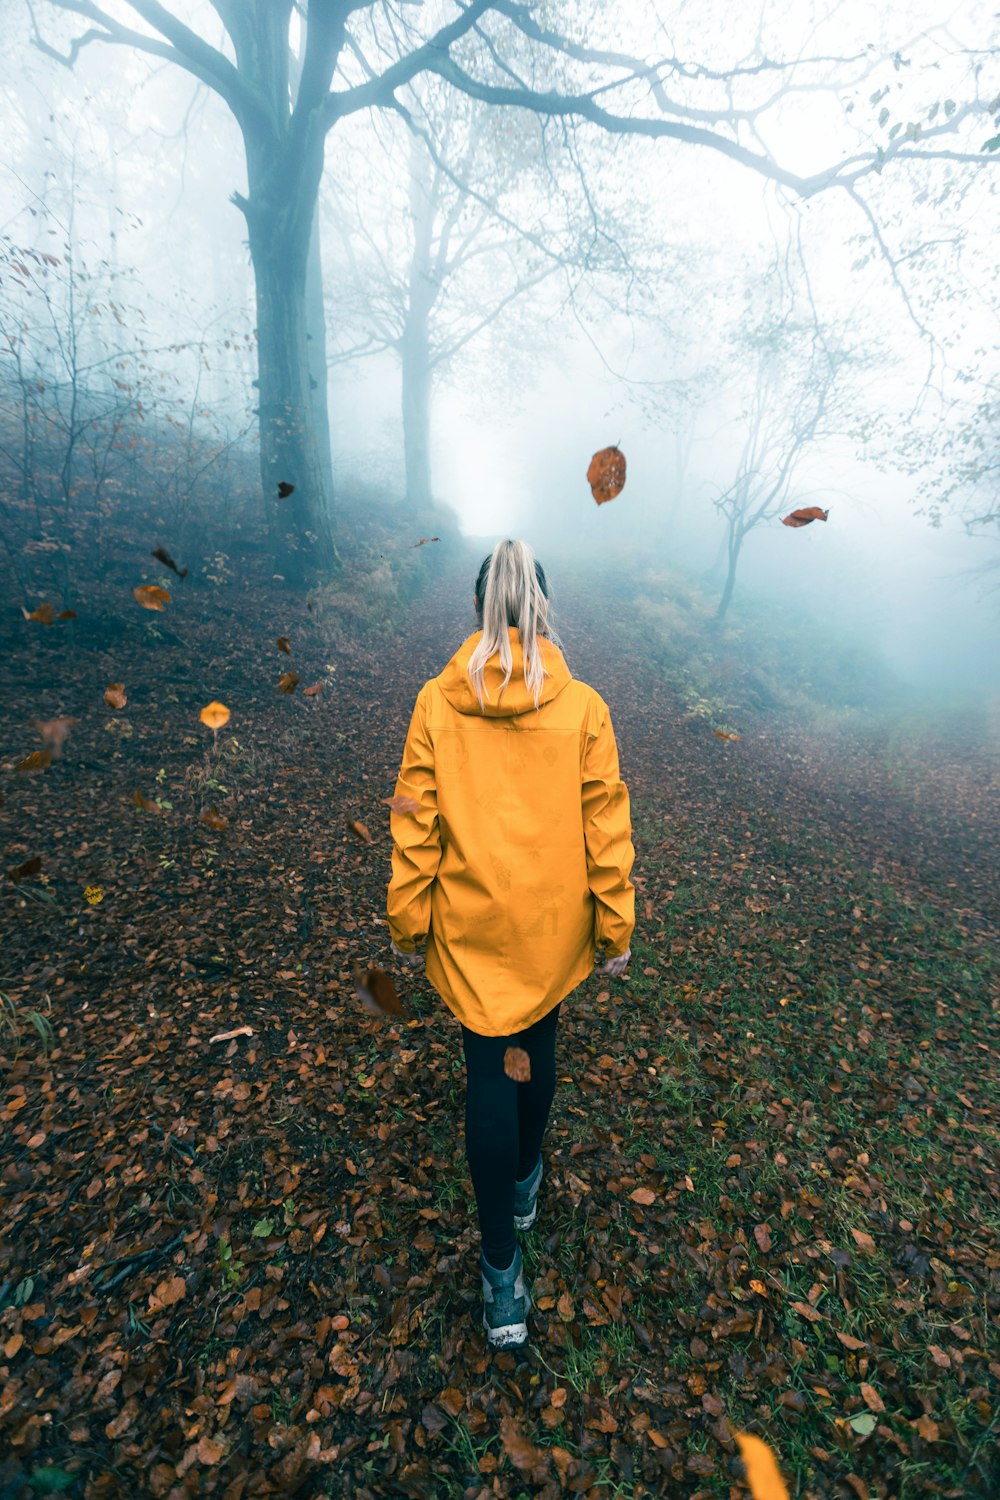 a person in a yellow jacket walking through a forest